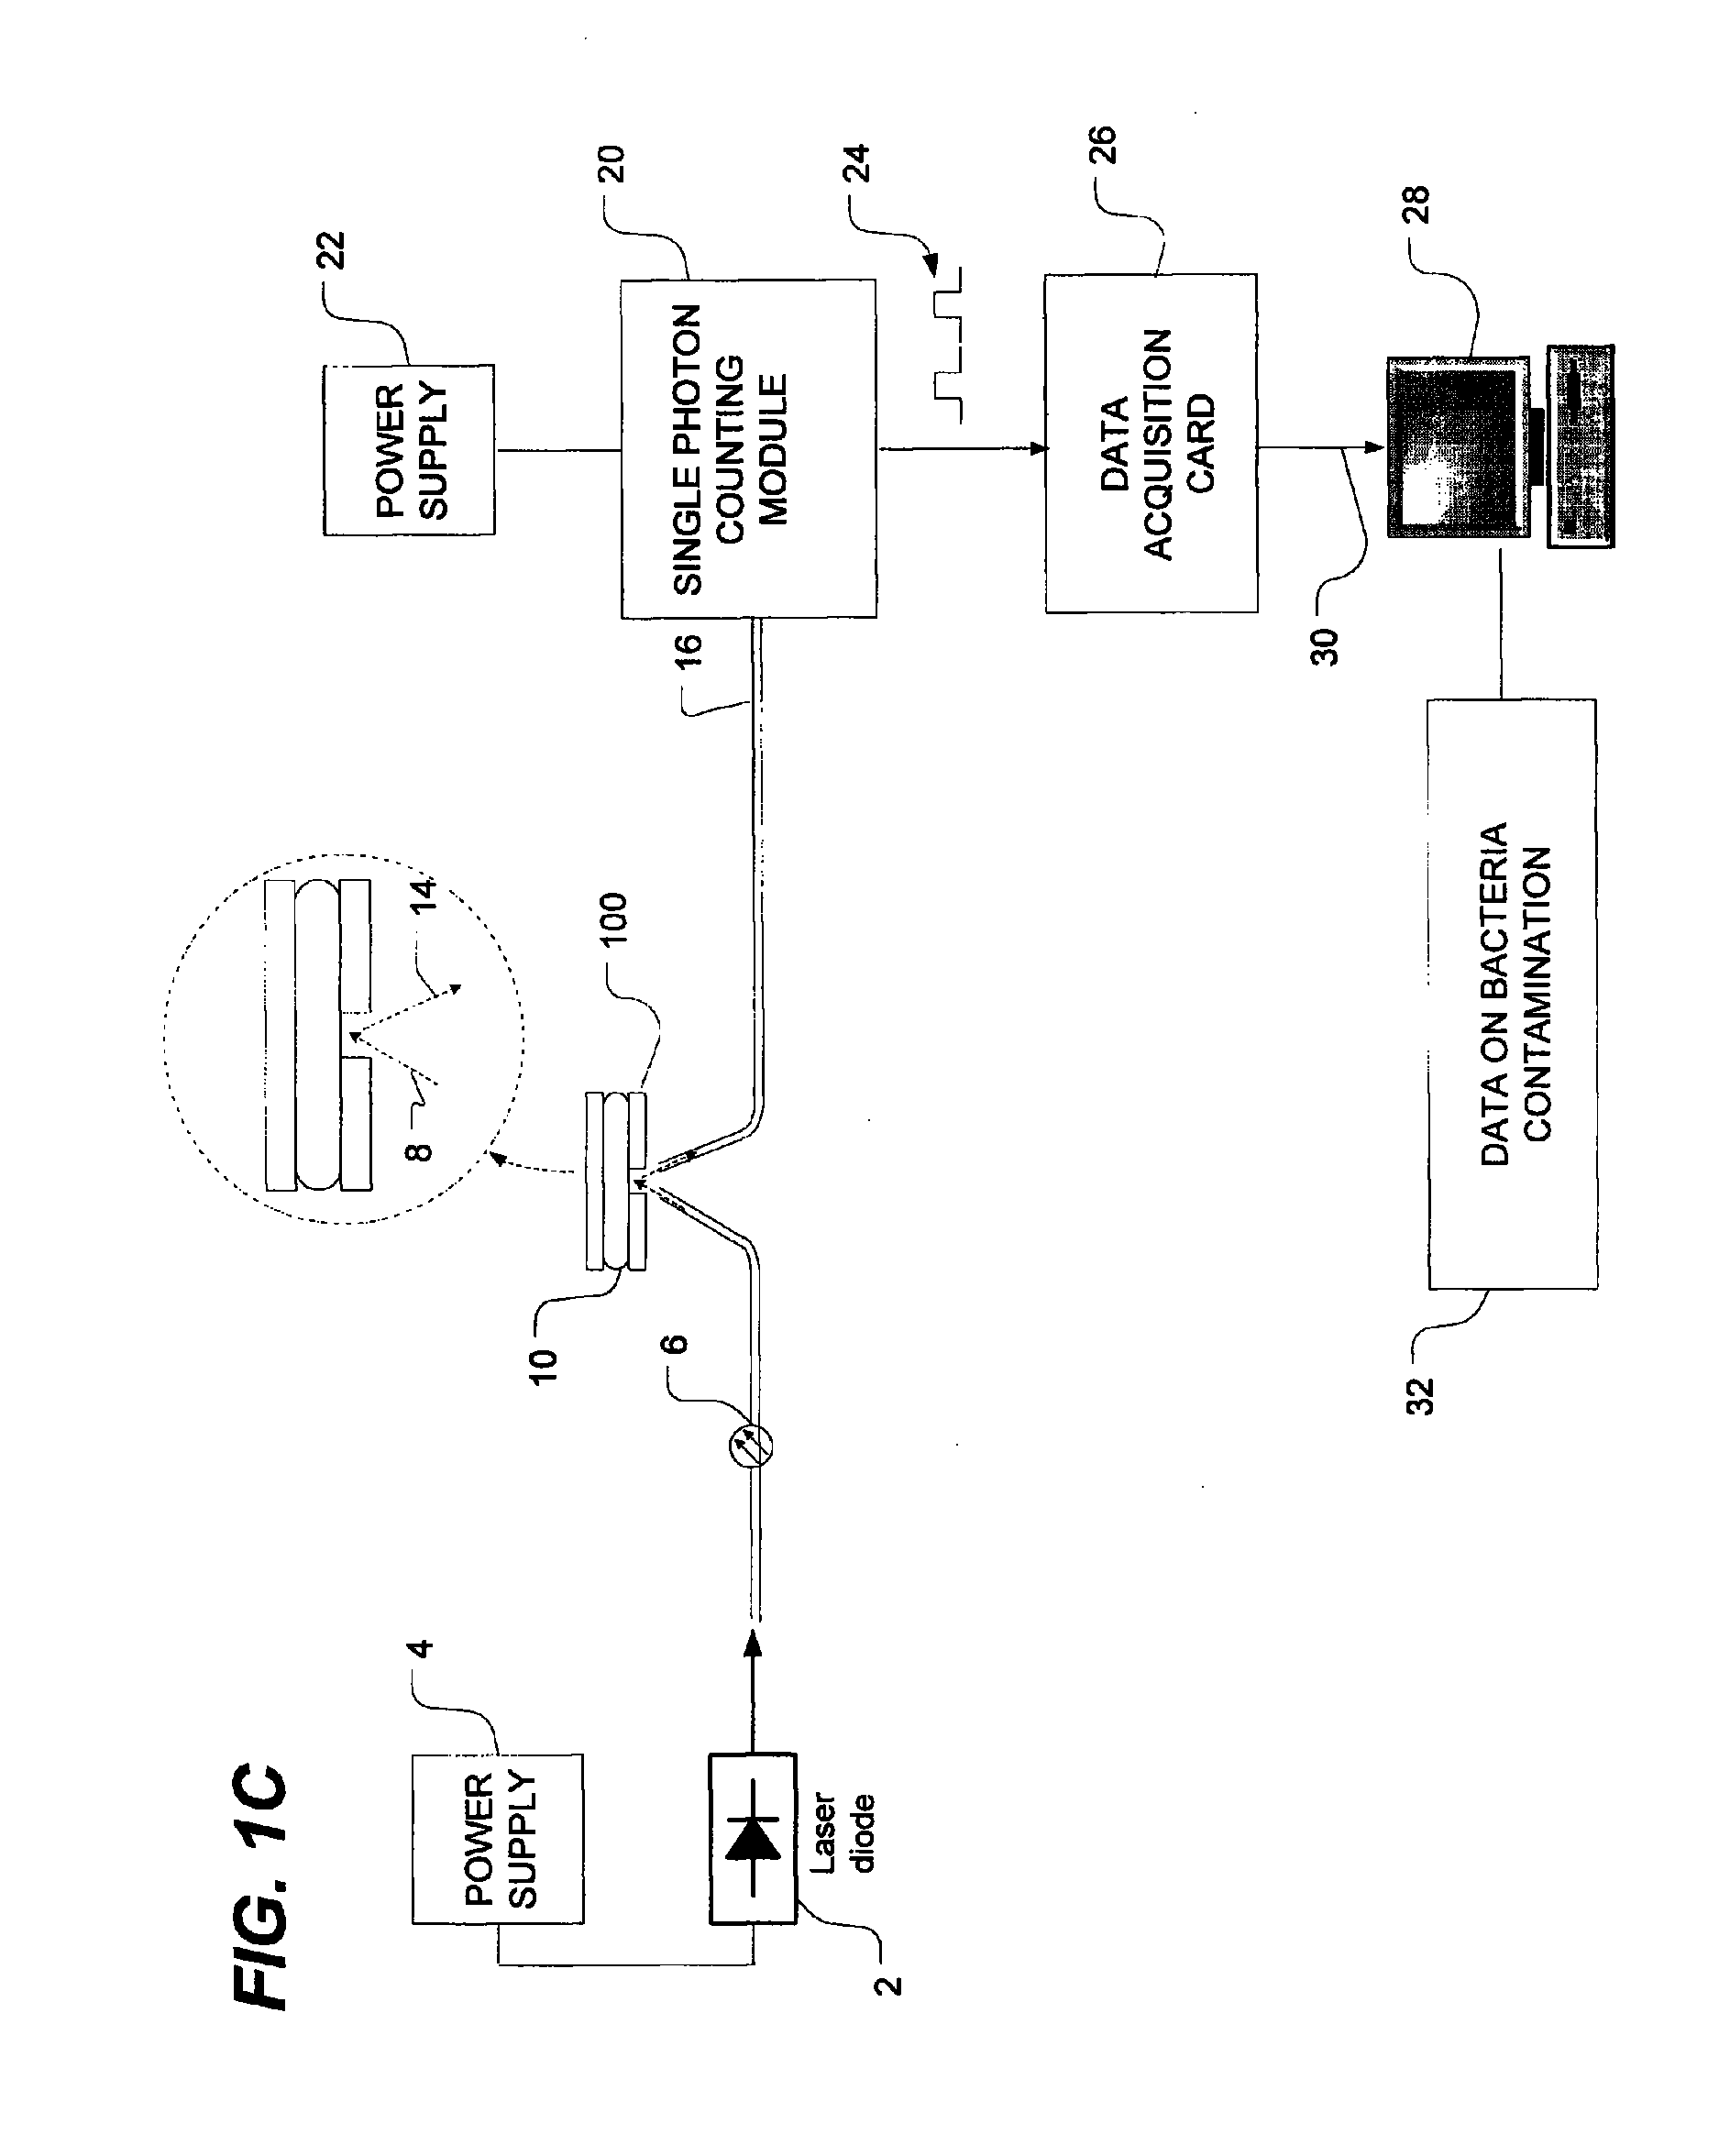 Method of detecting bacterial contamination using dynamic light scattering